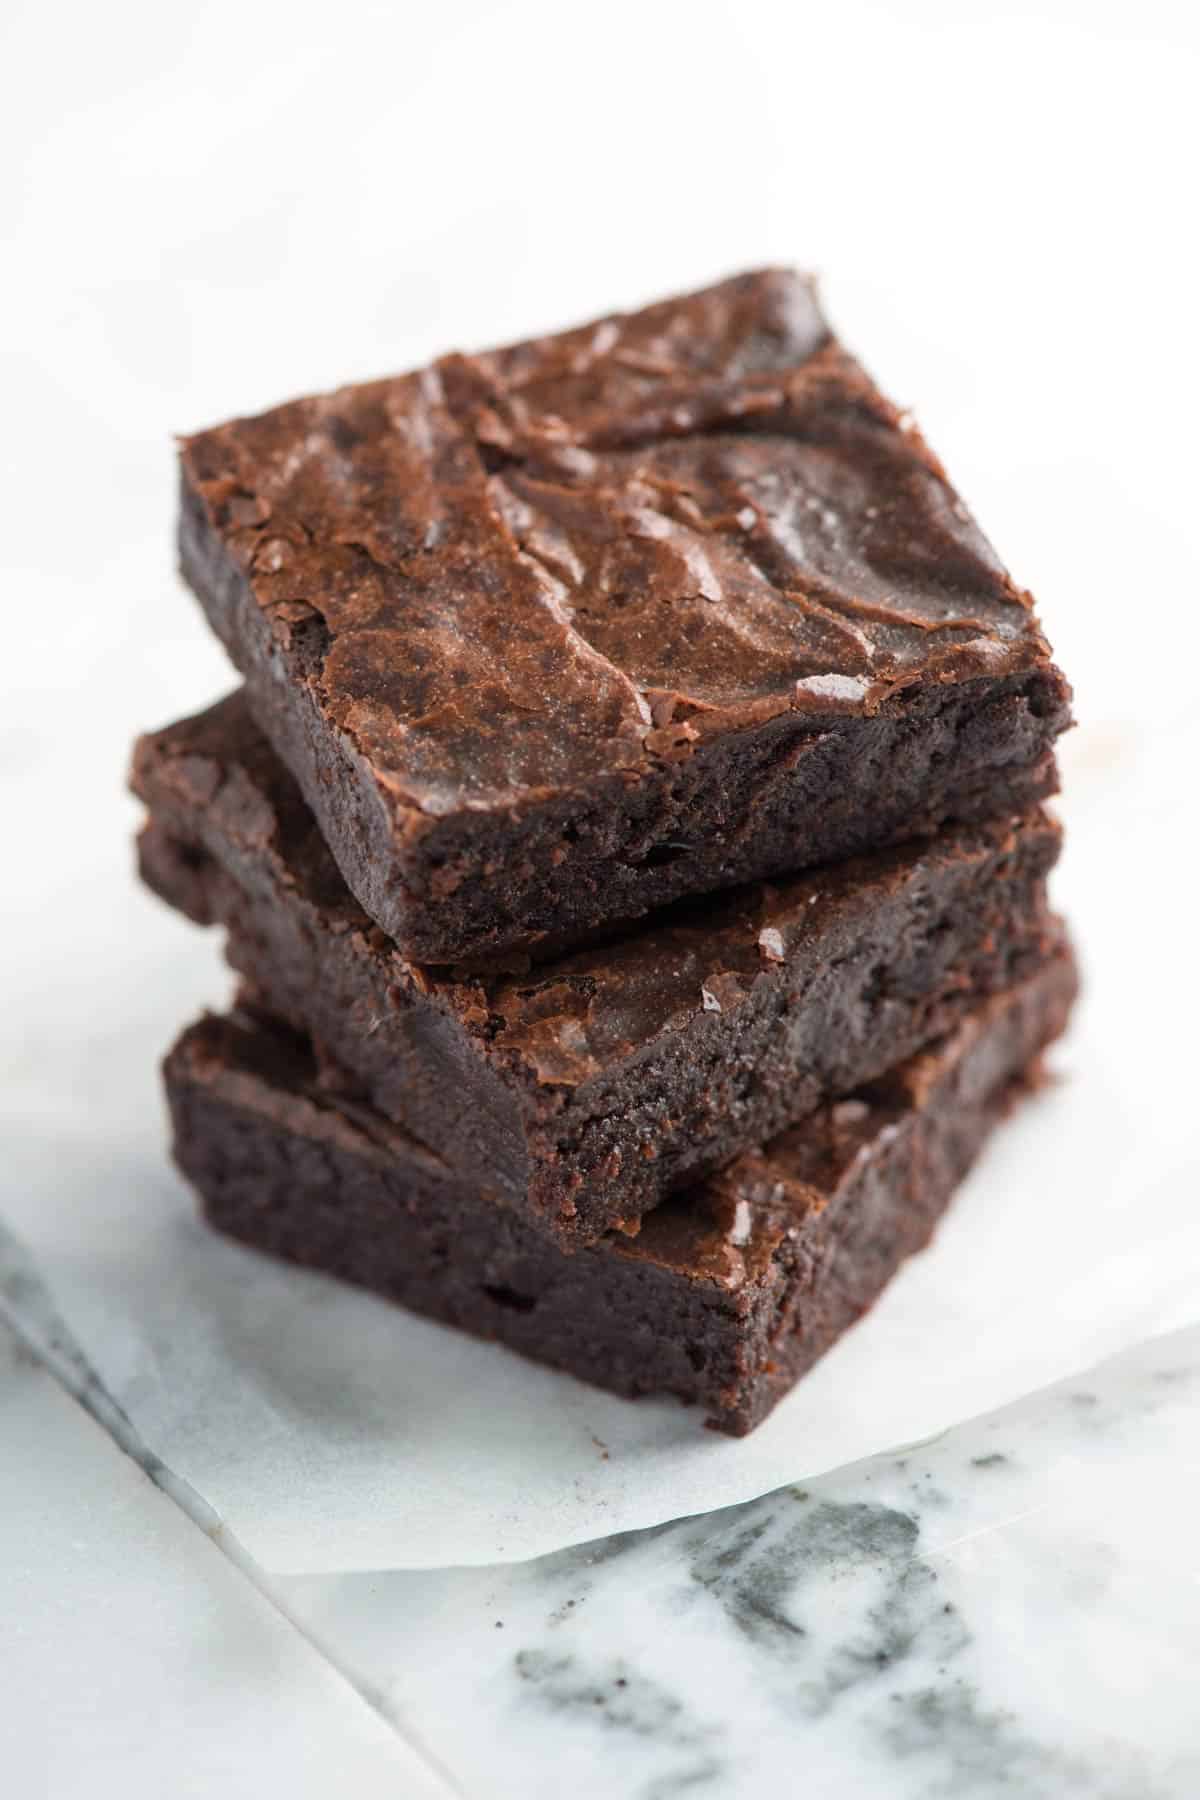 A stack of fudgy brownies with crinkly tops